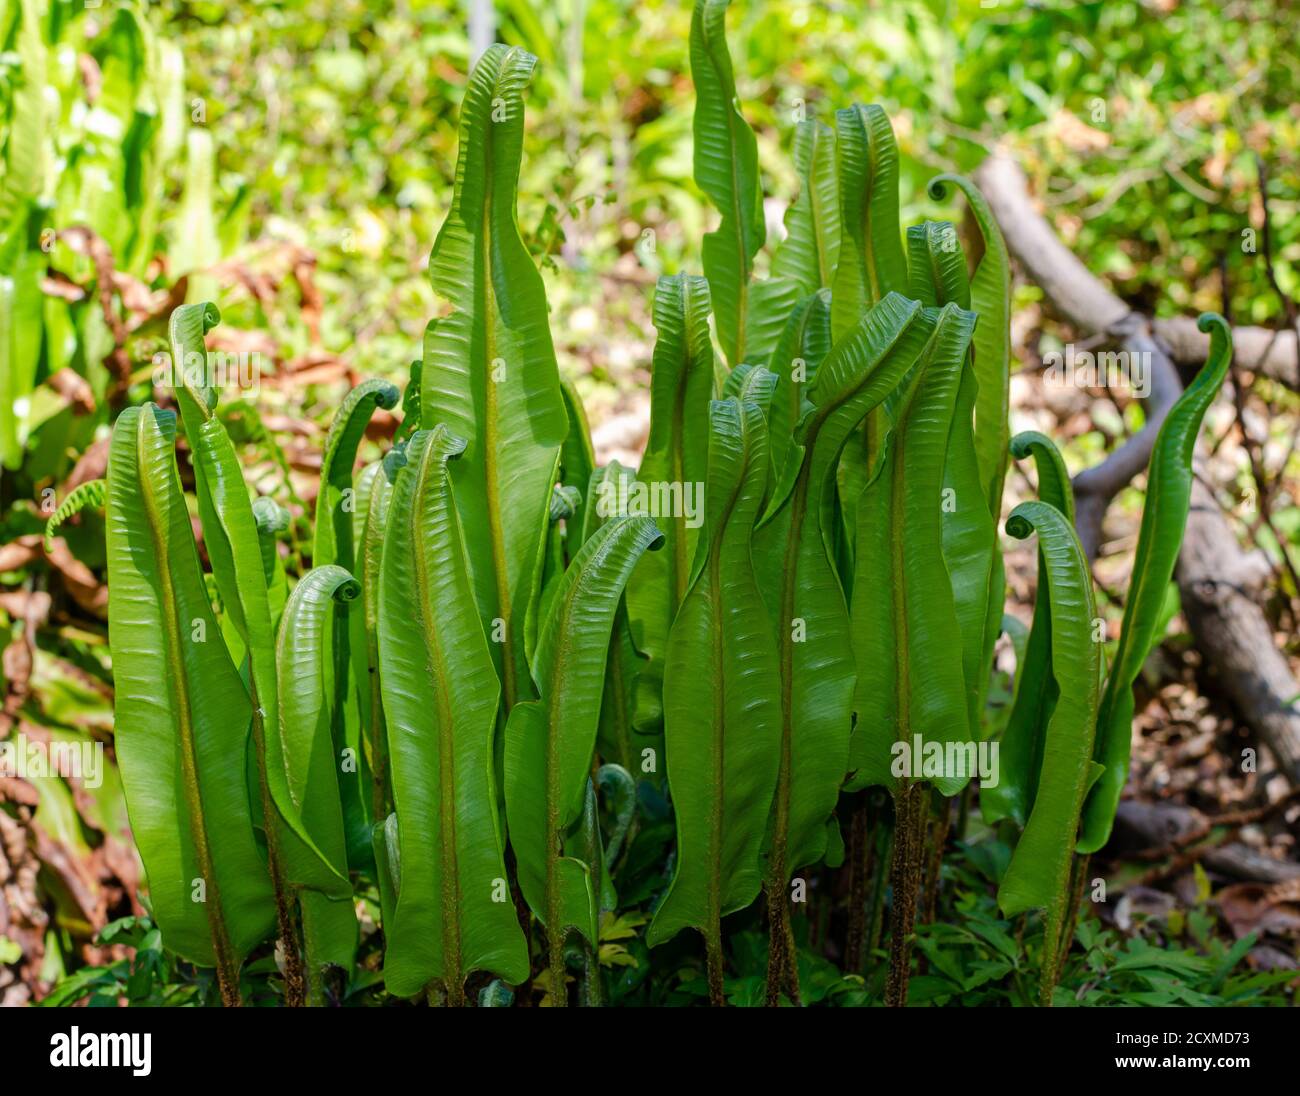 Tongue fern - Phyllitis scolopendrium in the botany in Poland. Stock Photo